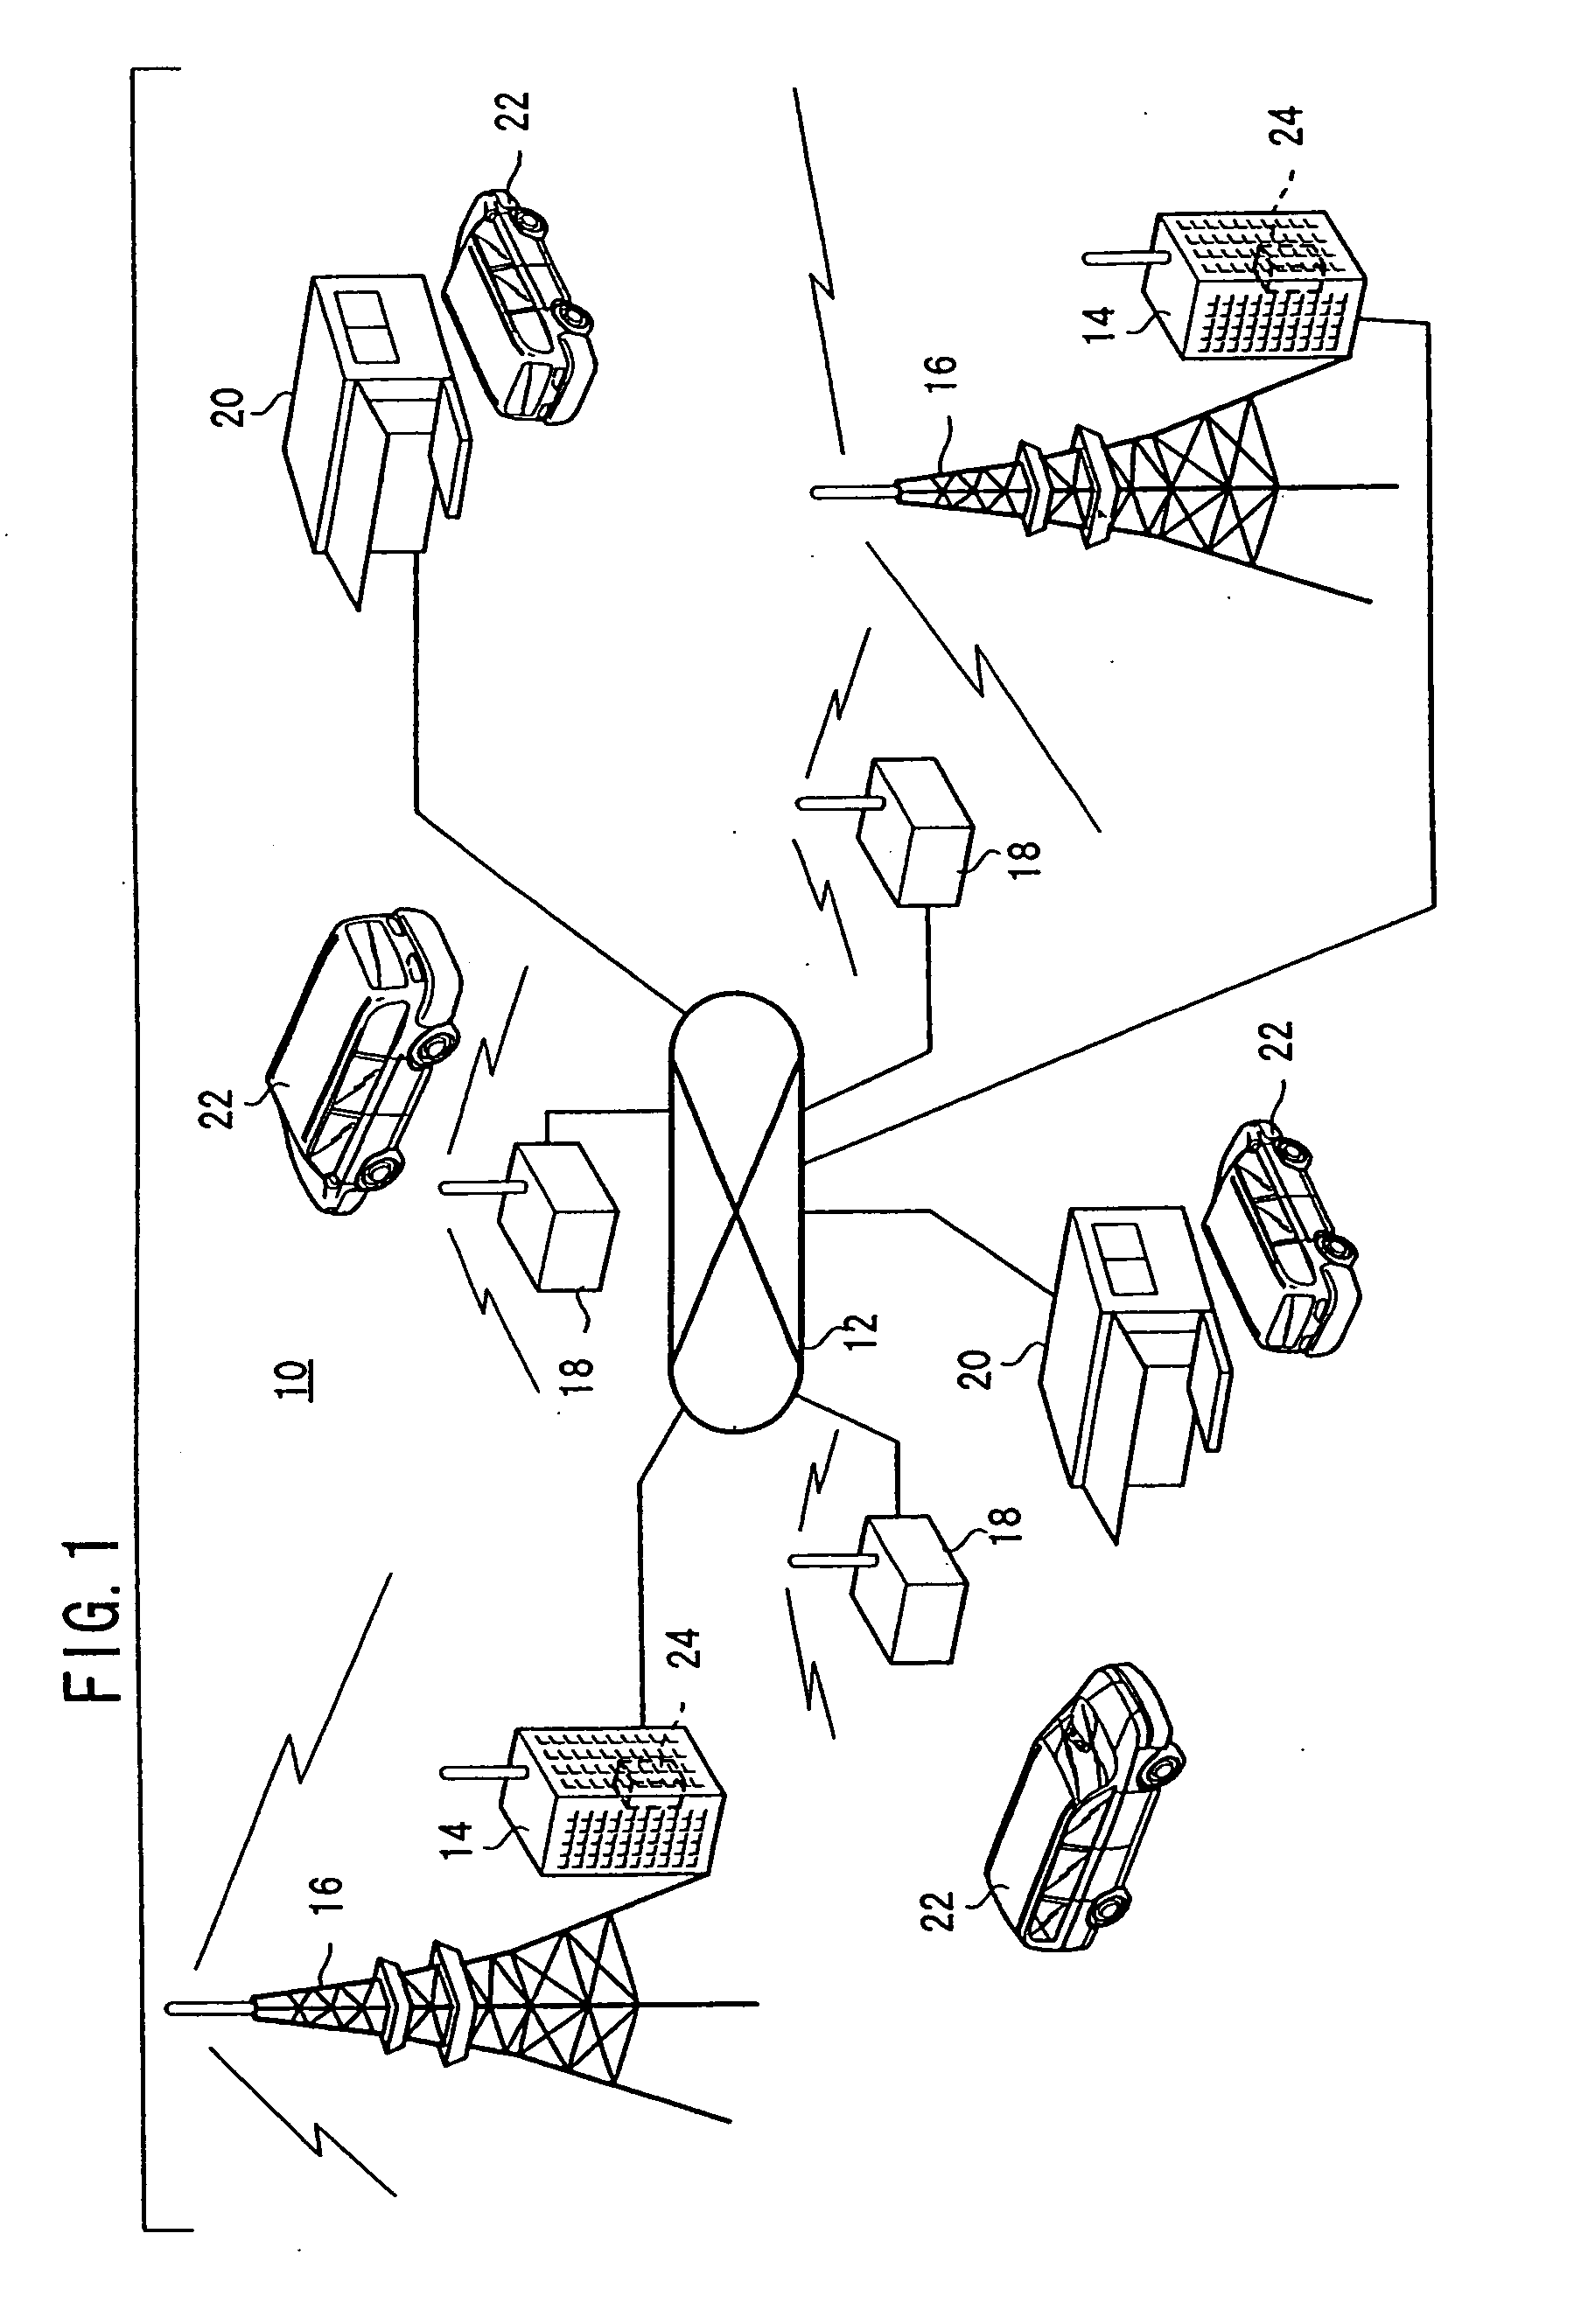 Mover, Information Center, and Mobile Communication System